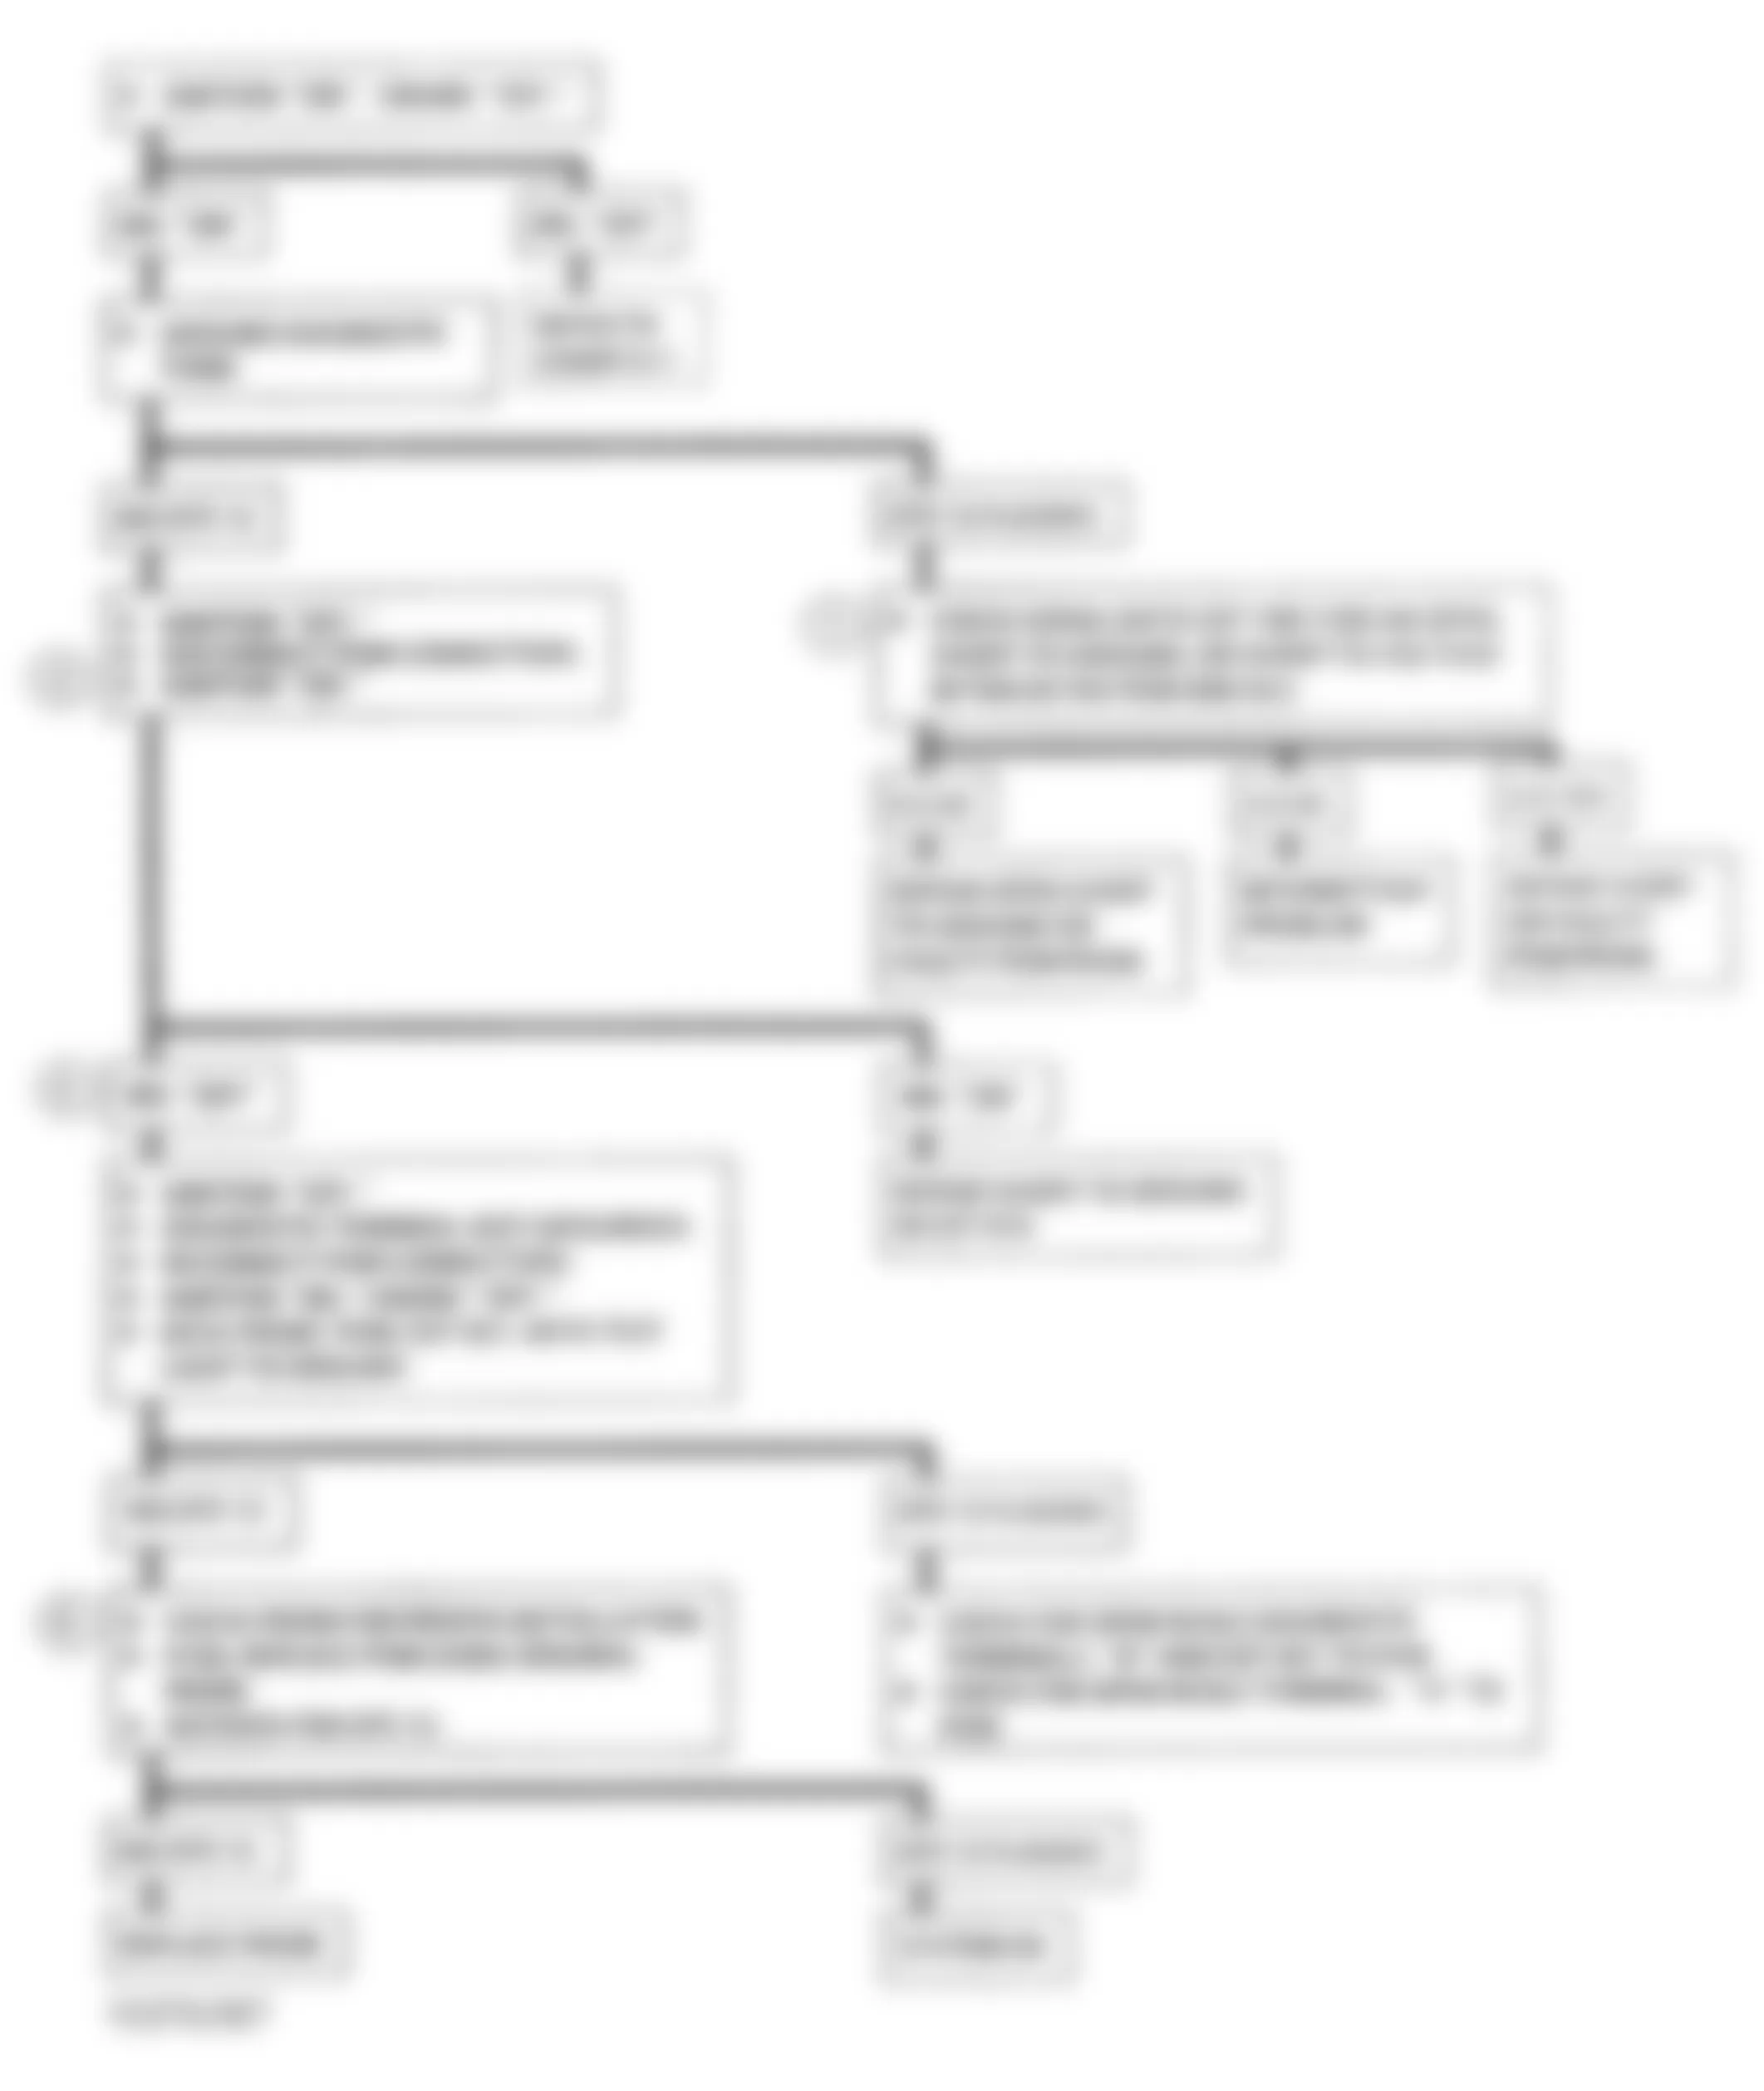 Chevrolet Suburban K2500 1993 - Component Locations -  A-2, Flowchart, No DLC Data, MIL On All Time - A/T